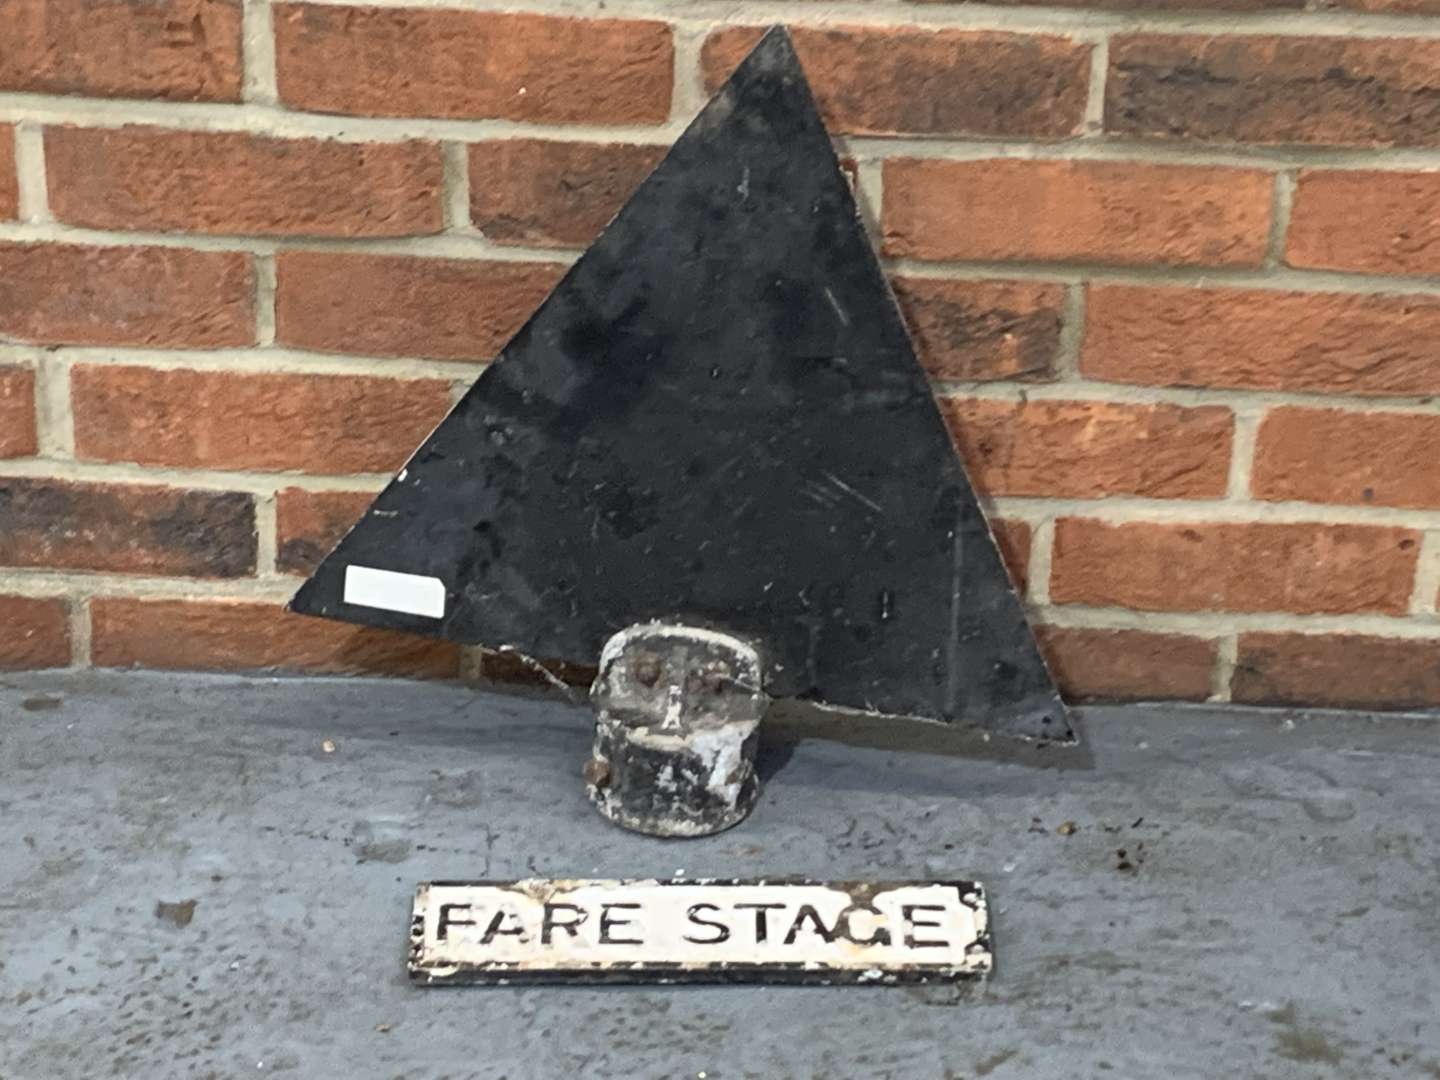 <p>Fare Stage Sign and Triangular Pole Sign</p>